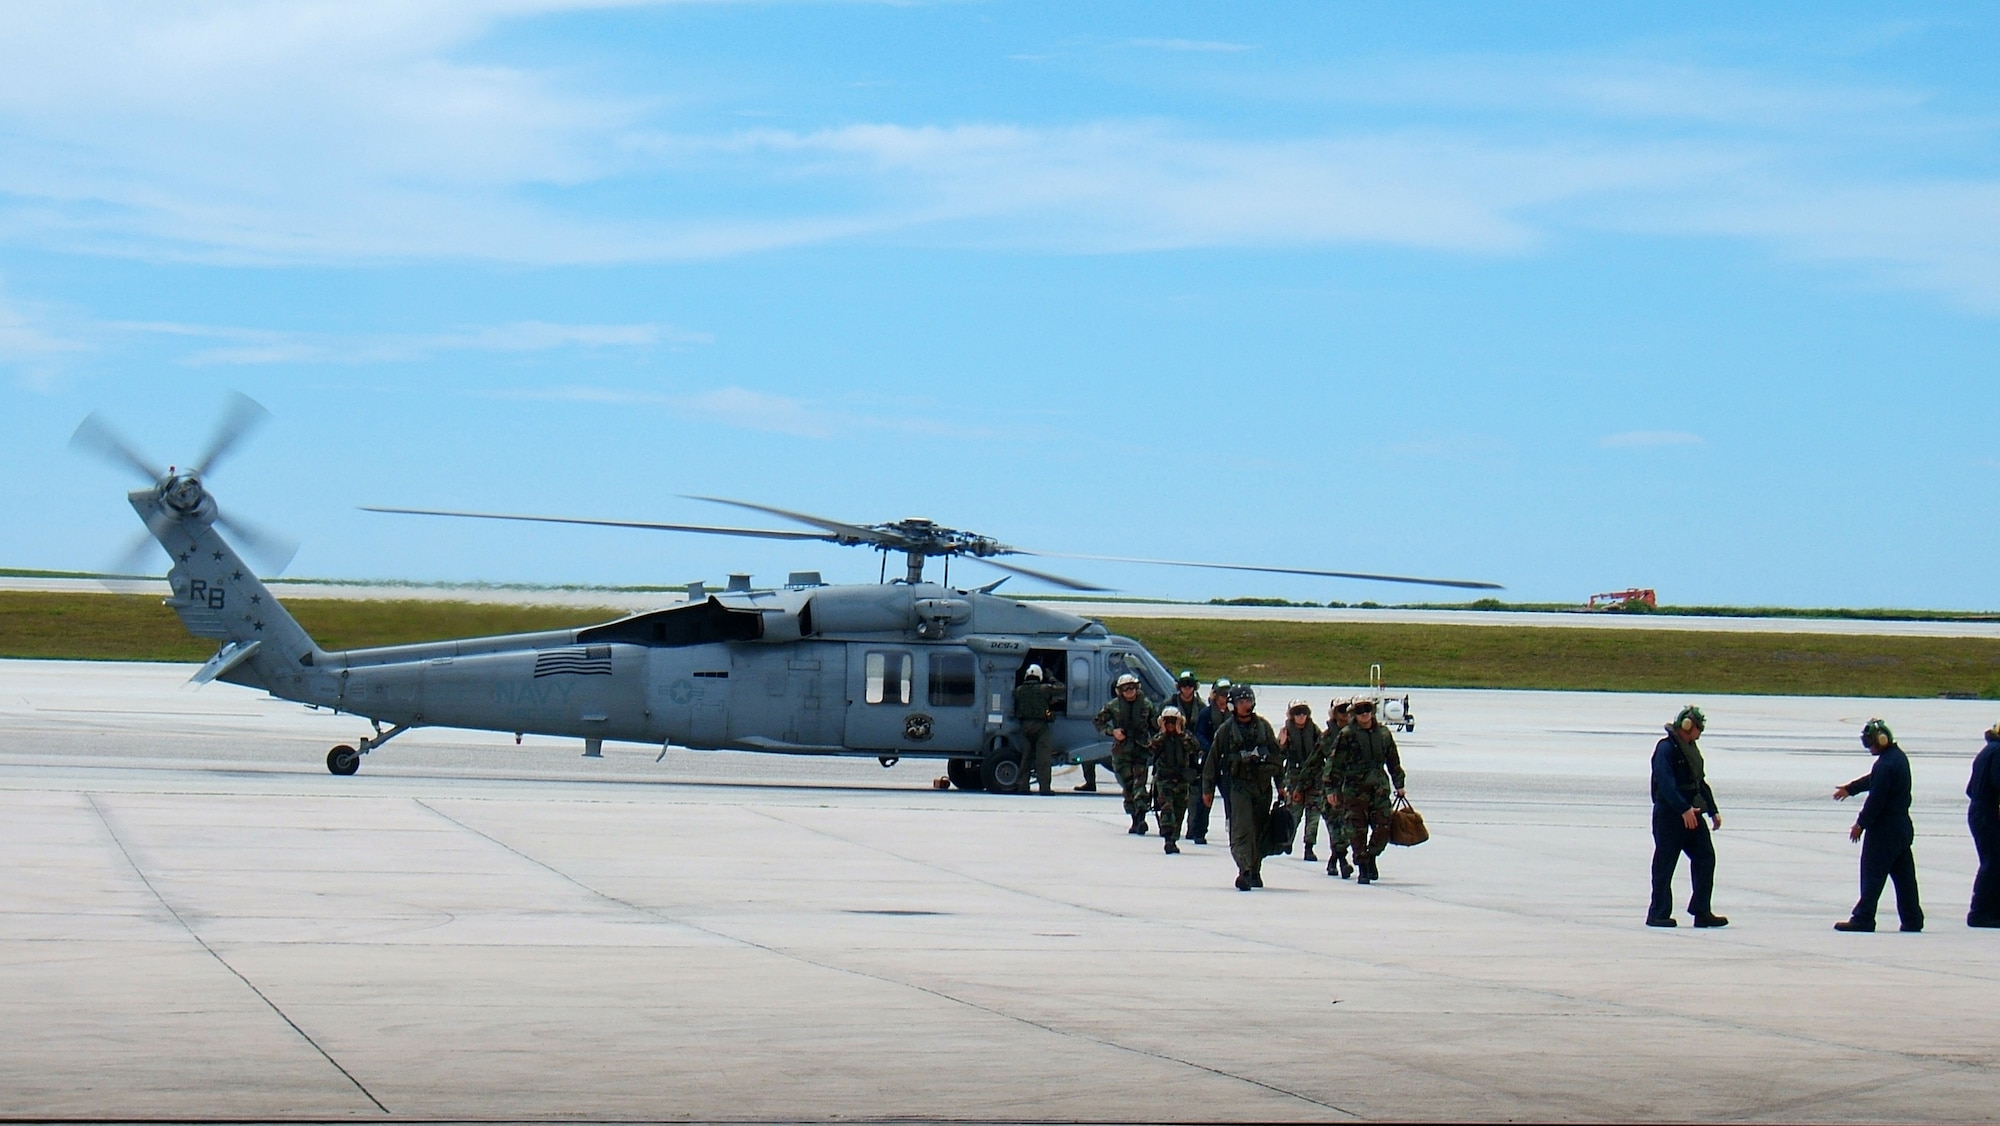 ANDERSEN AFB, Guam - Members from the 36th Medical Group, from the 36th Wing and the U.S. Navy Helicopter Sea Combat Squadron 25, stationed at Andersen Air Force Base, Guam disembark from a MH-60S helicopter after returning home Sunday following a 72-day humanitarian-and-civic-assistance deployment on the USNS Mercy.   The members participated in theater security cooperation and medical assistance missions in partnership with non-governmental organizations, international military medical personnel and host nations of the Philippines, Bangladesh, Indonesia and East Timor.  (Photo by: 36th Medical Group)